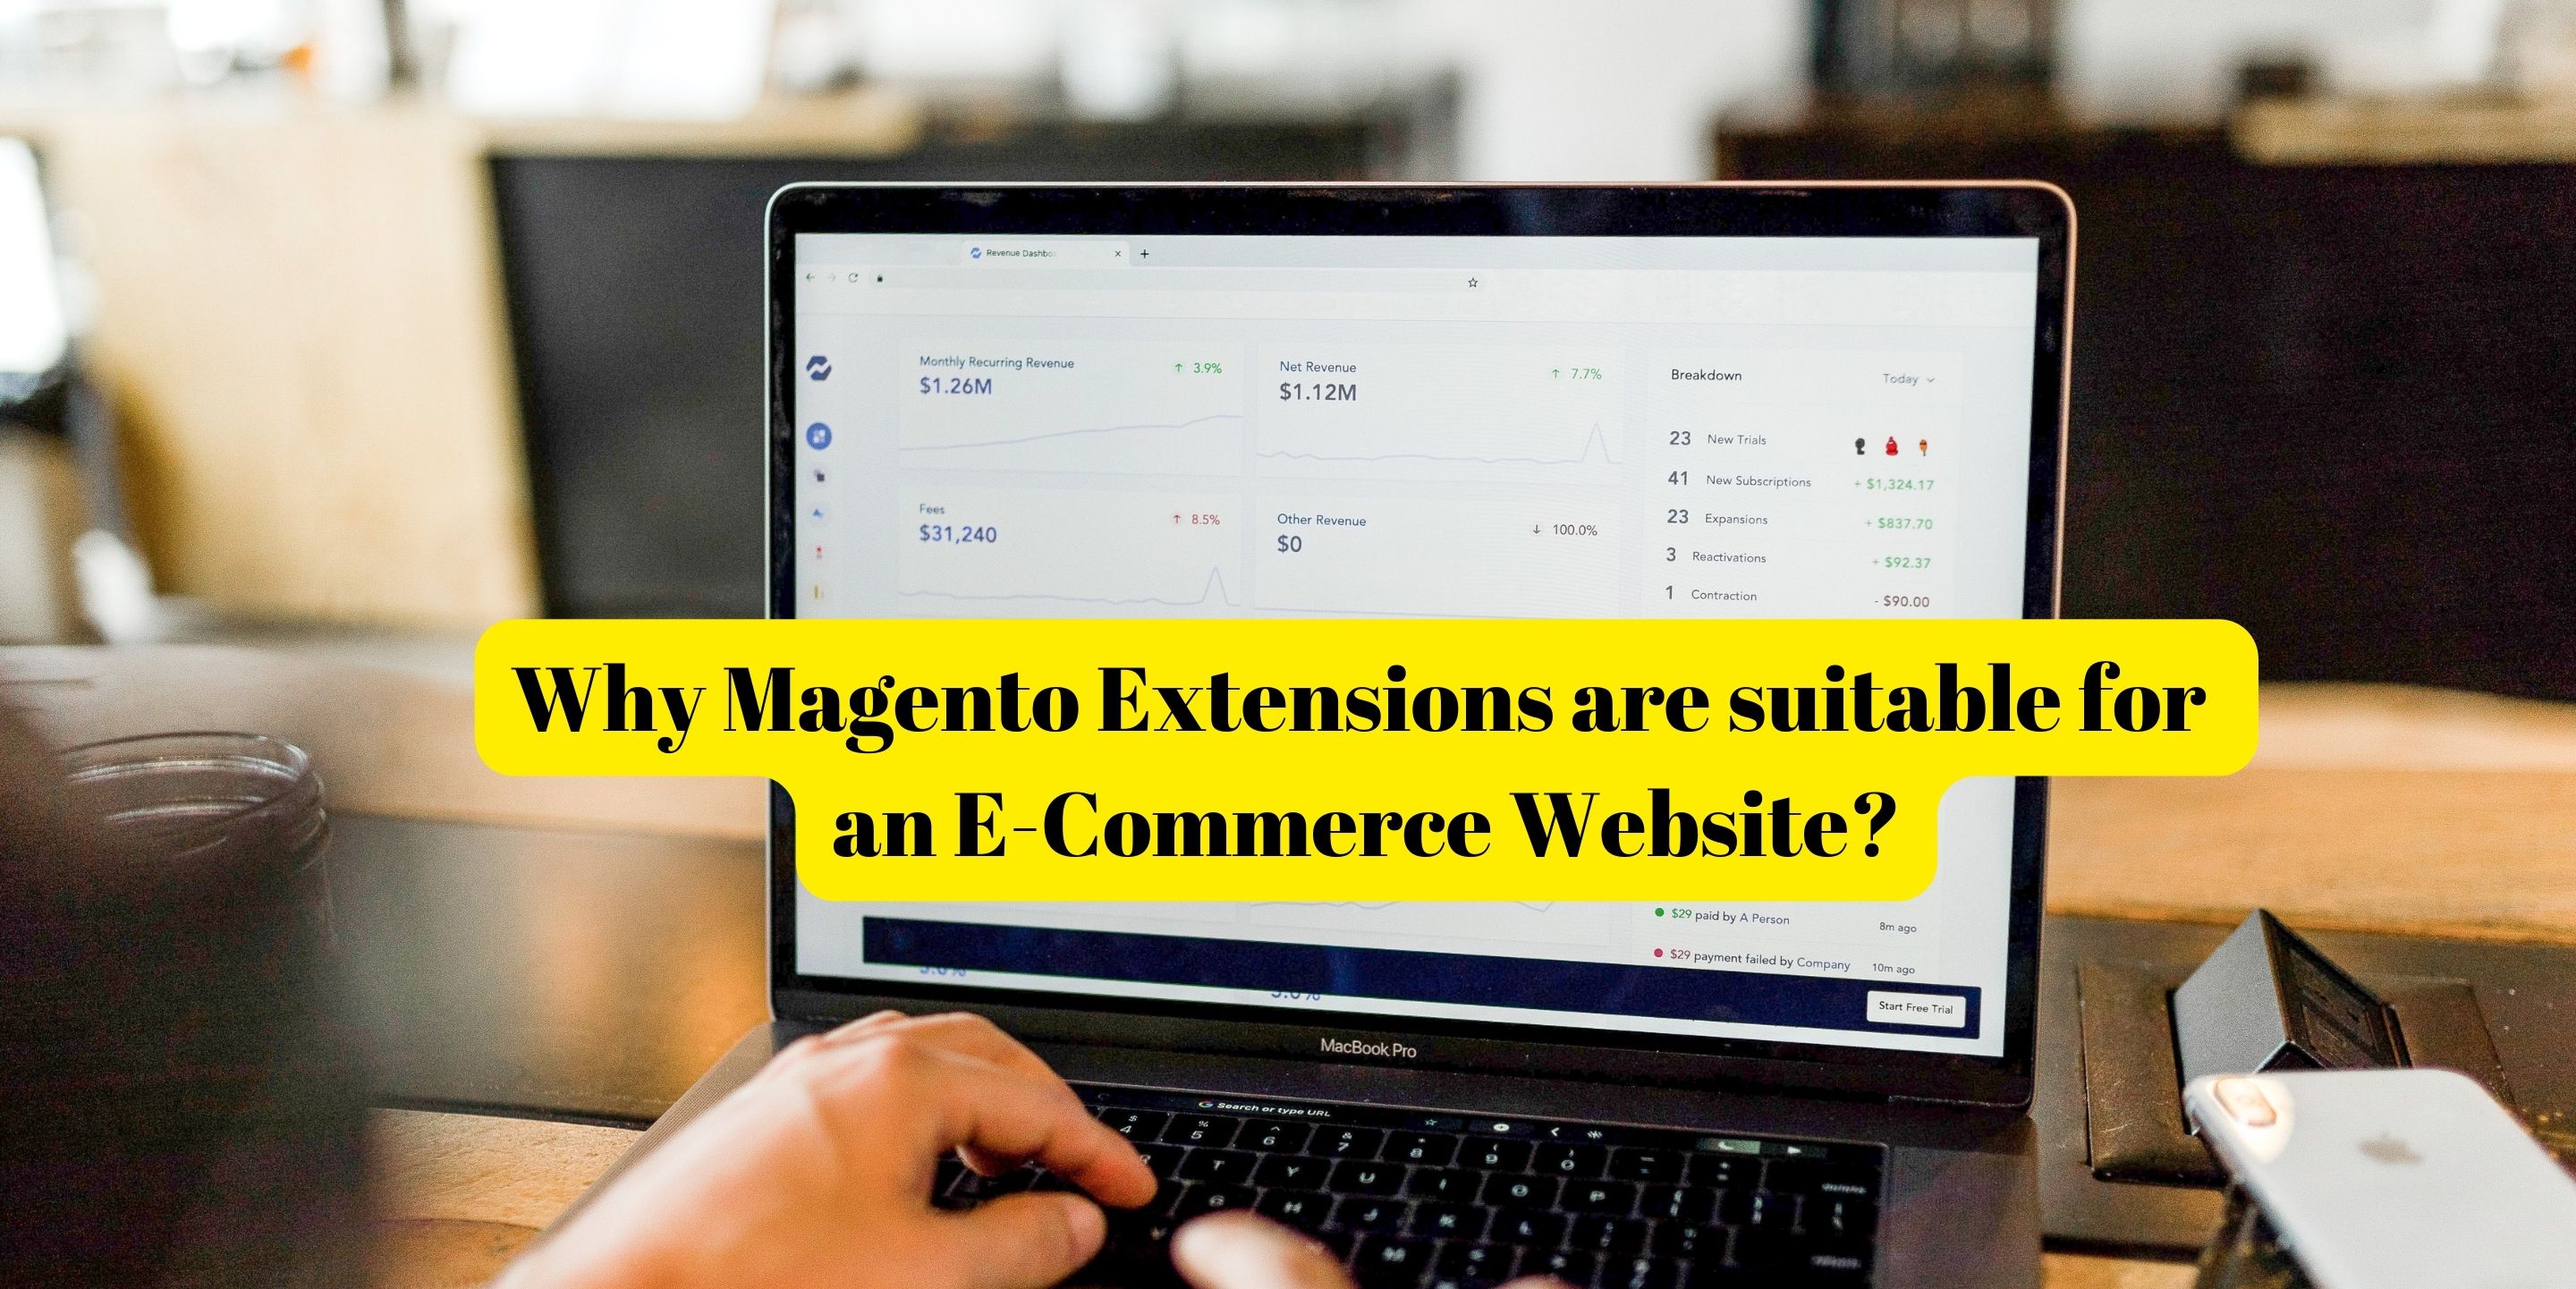 Why Magento Extensions are suitable for an E-Commerce Website?